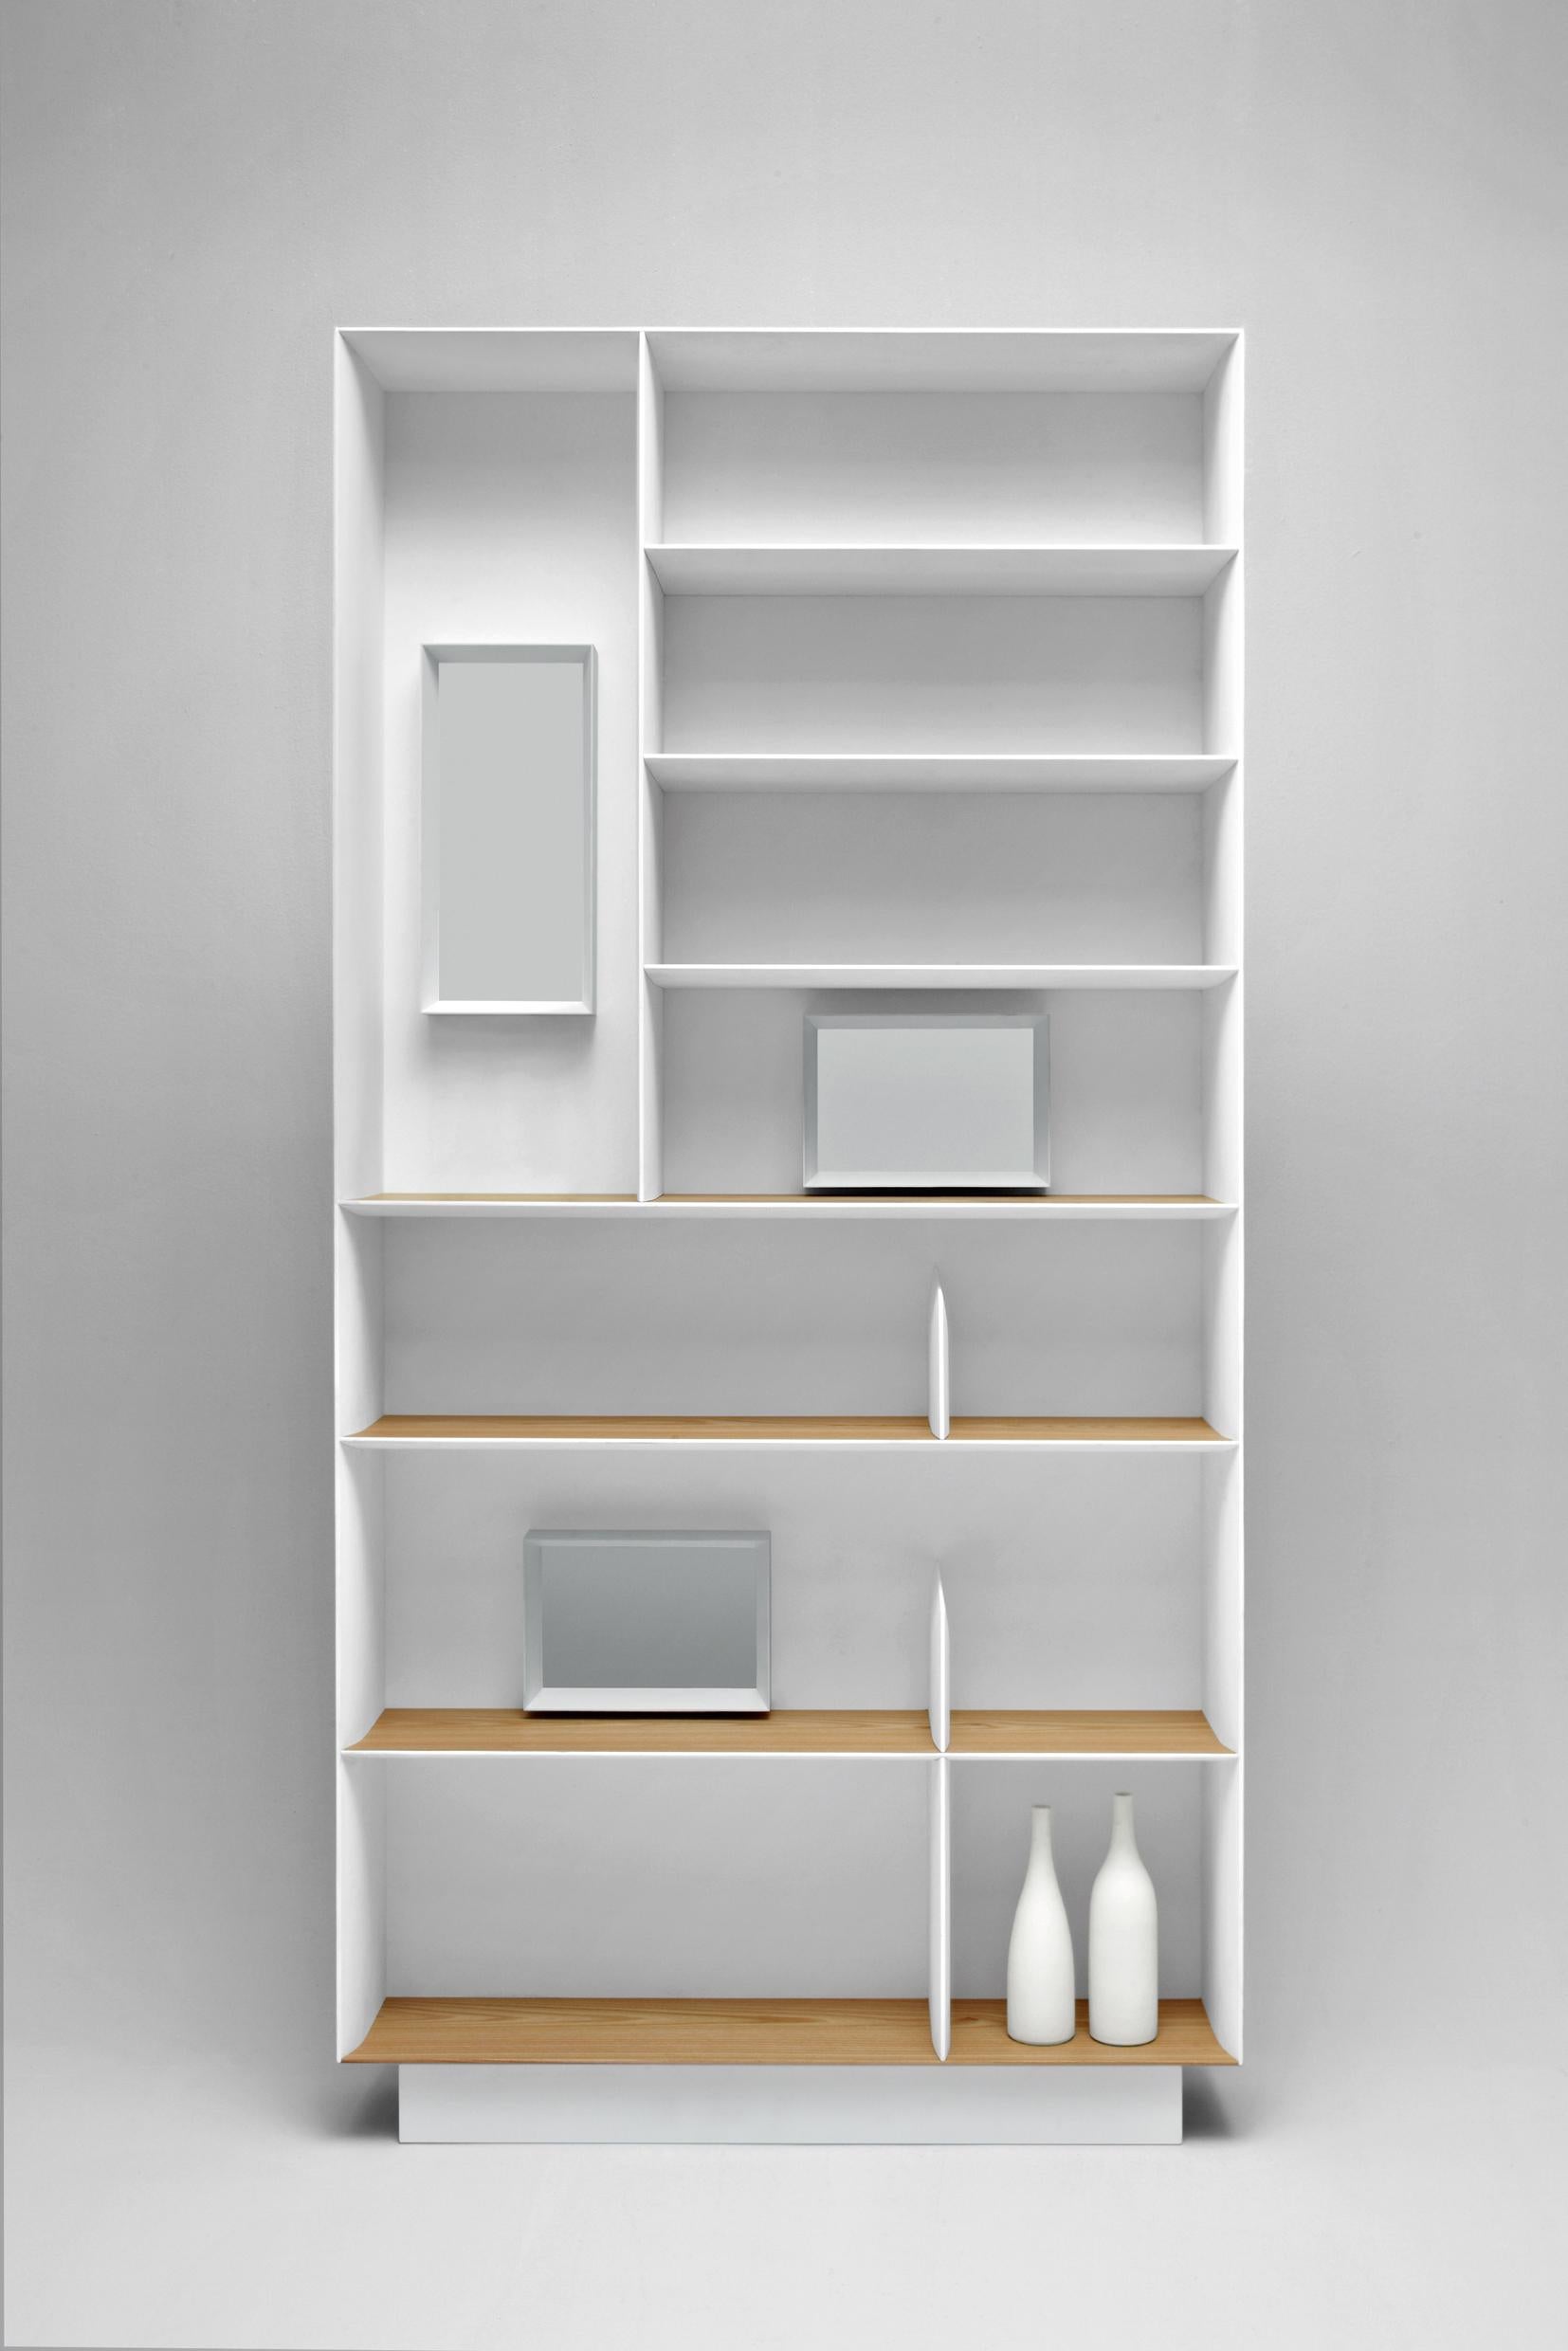 D3571 Hand Painted White Bookcase by Gio Ponti.
Expert-crafted in Italy exclusively by Molteni&C.

Modern yet minimalist, the D3571 bookshelf by Gio Ponti delights with surprising touches like asymmetrical design and optional applied mirrors.